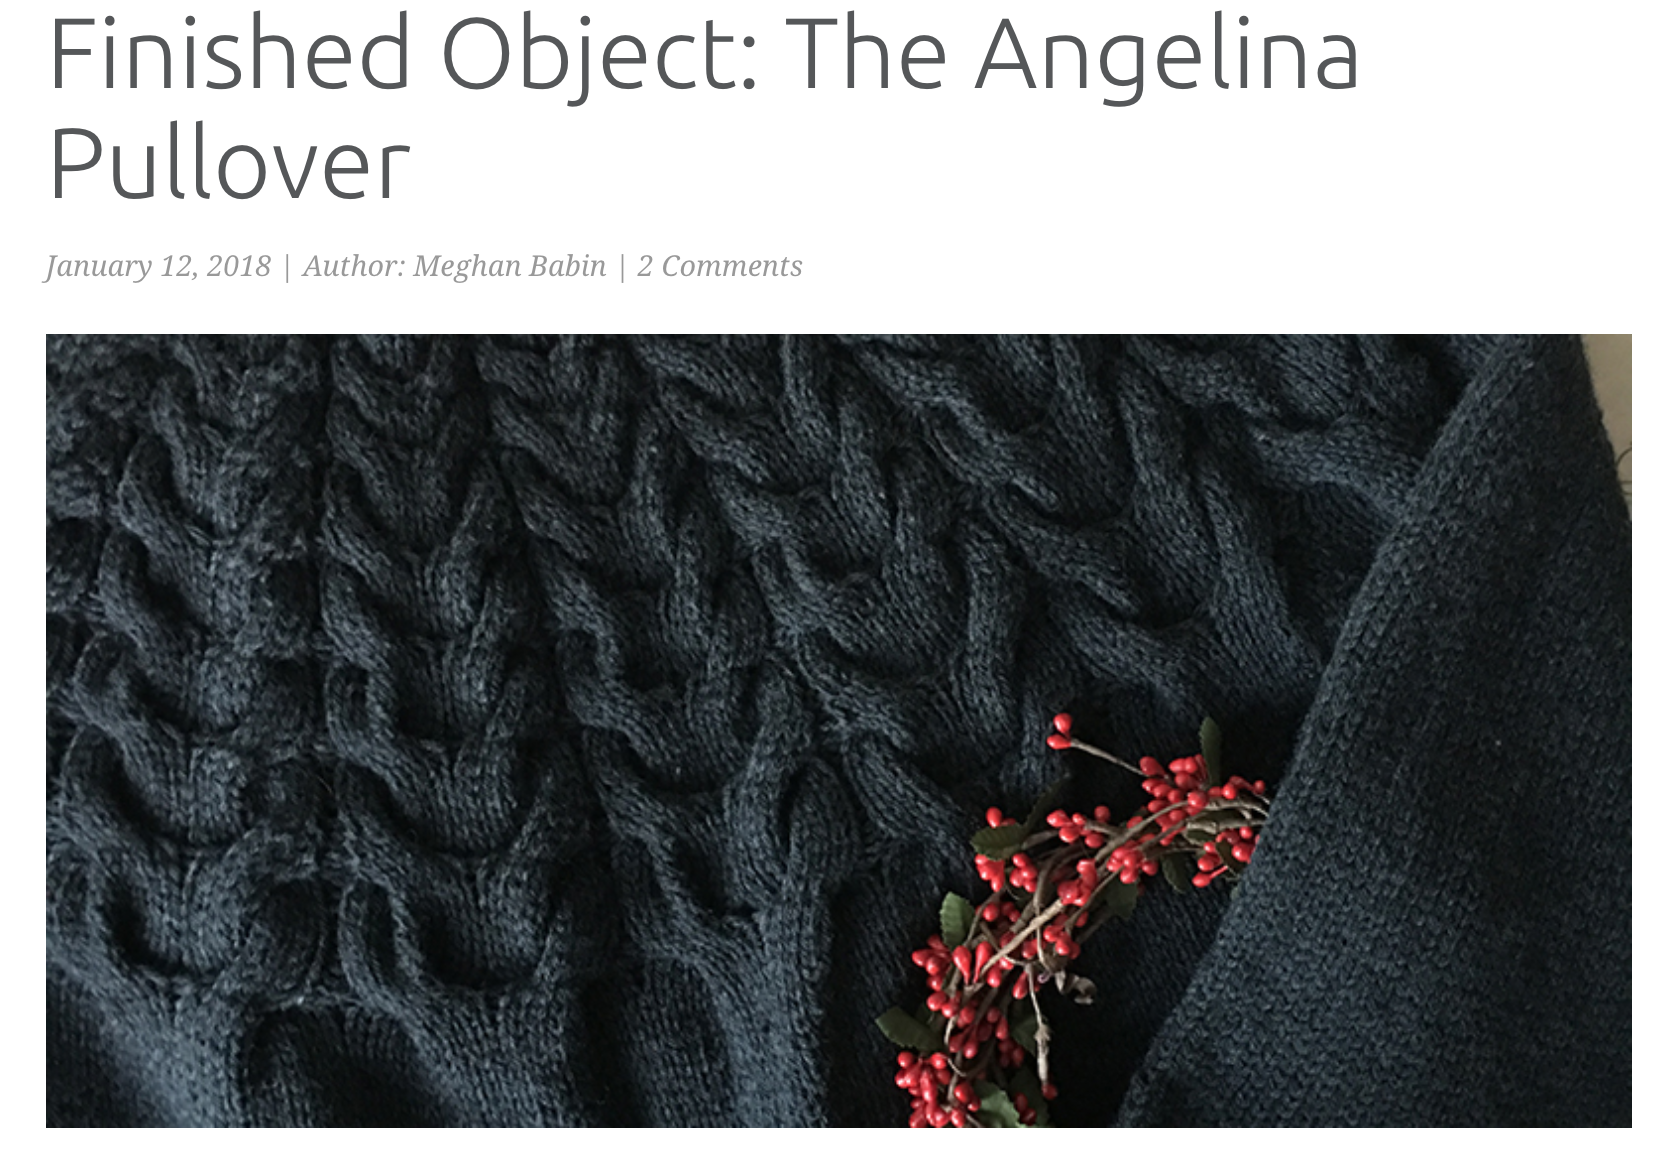 angelina pullover post.png